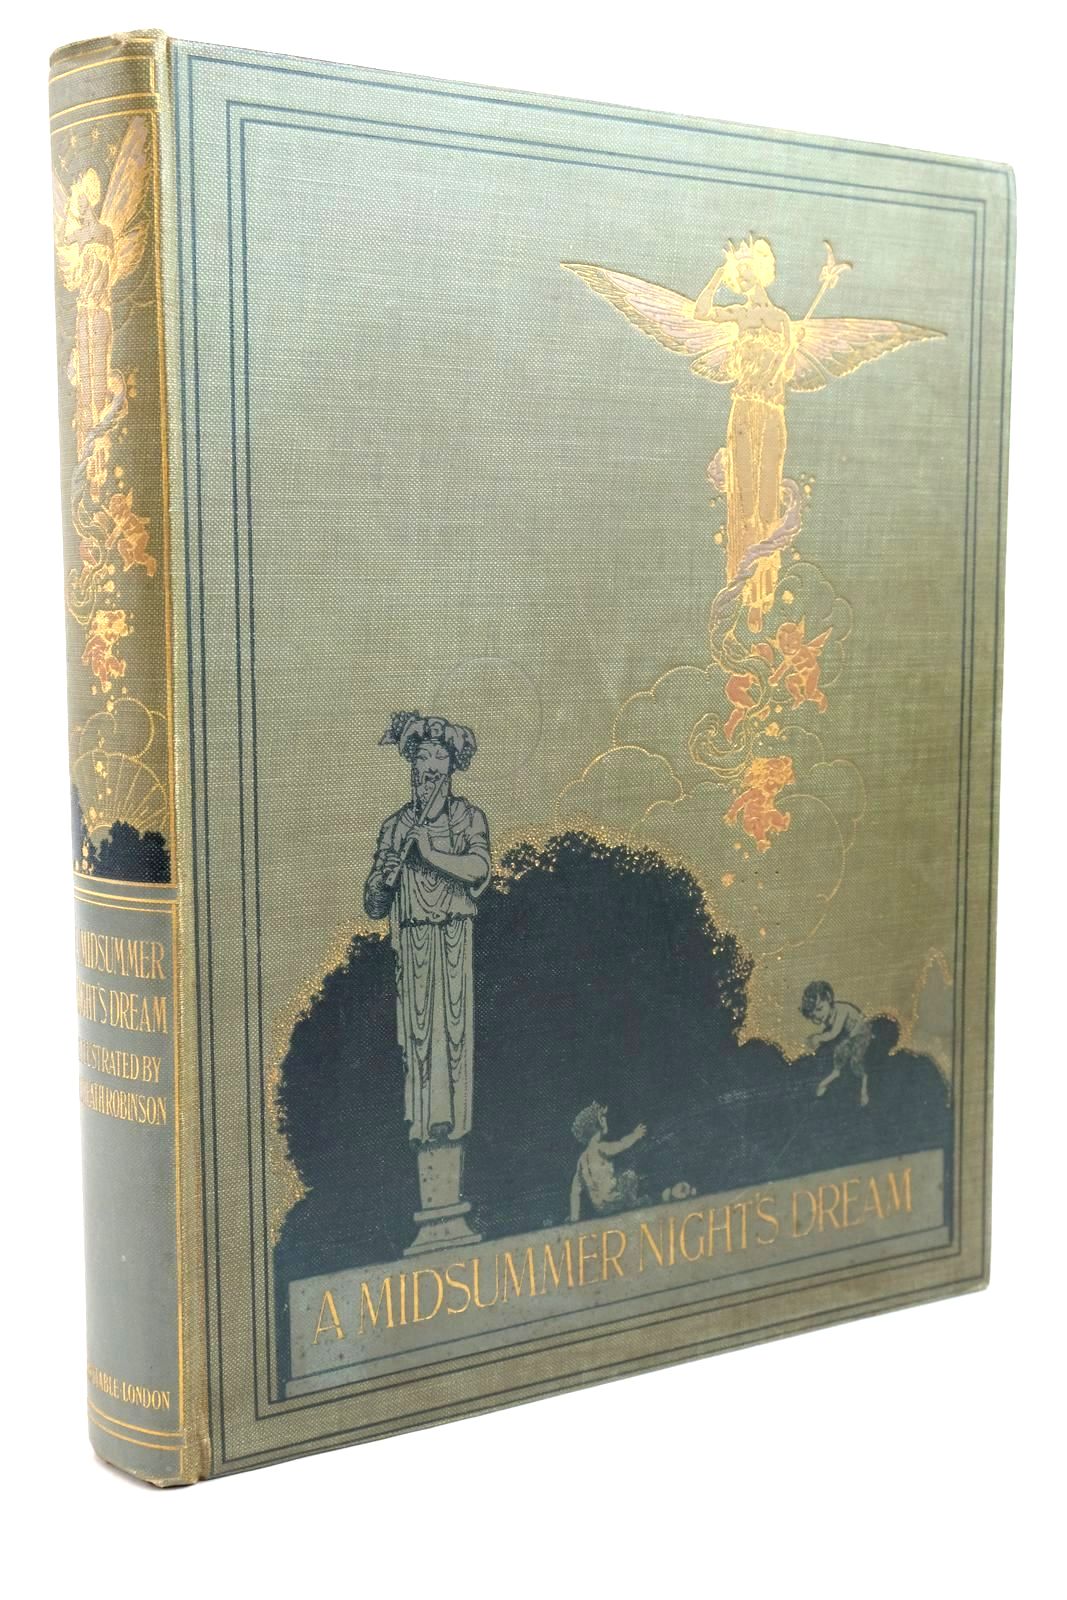 Photo of A MIDSUMMER NIGHT'S DREAM written by Shakespeare, William illustrated by Robinson, W. Heath published by Constable and Company Ltd. (STOCK CODE: 1321101)  for sale by Stella & Rose's Books